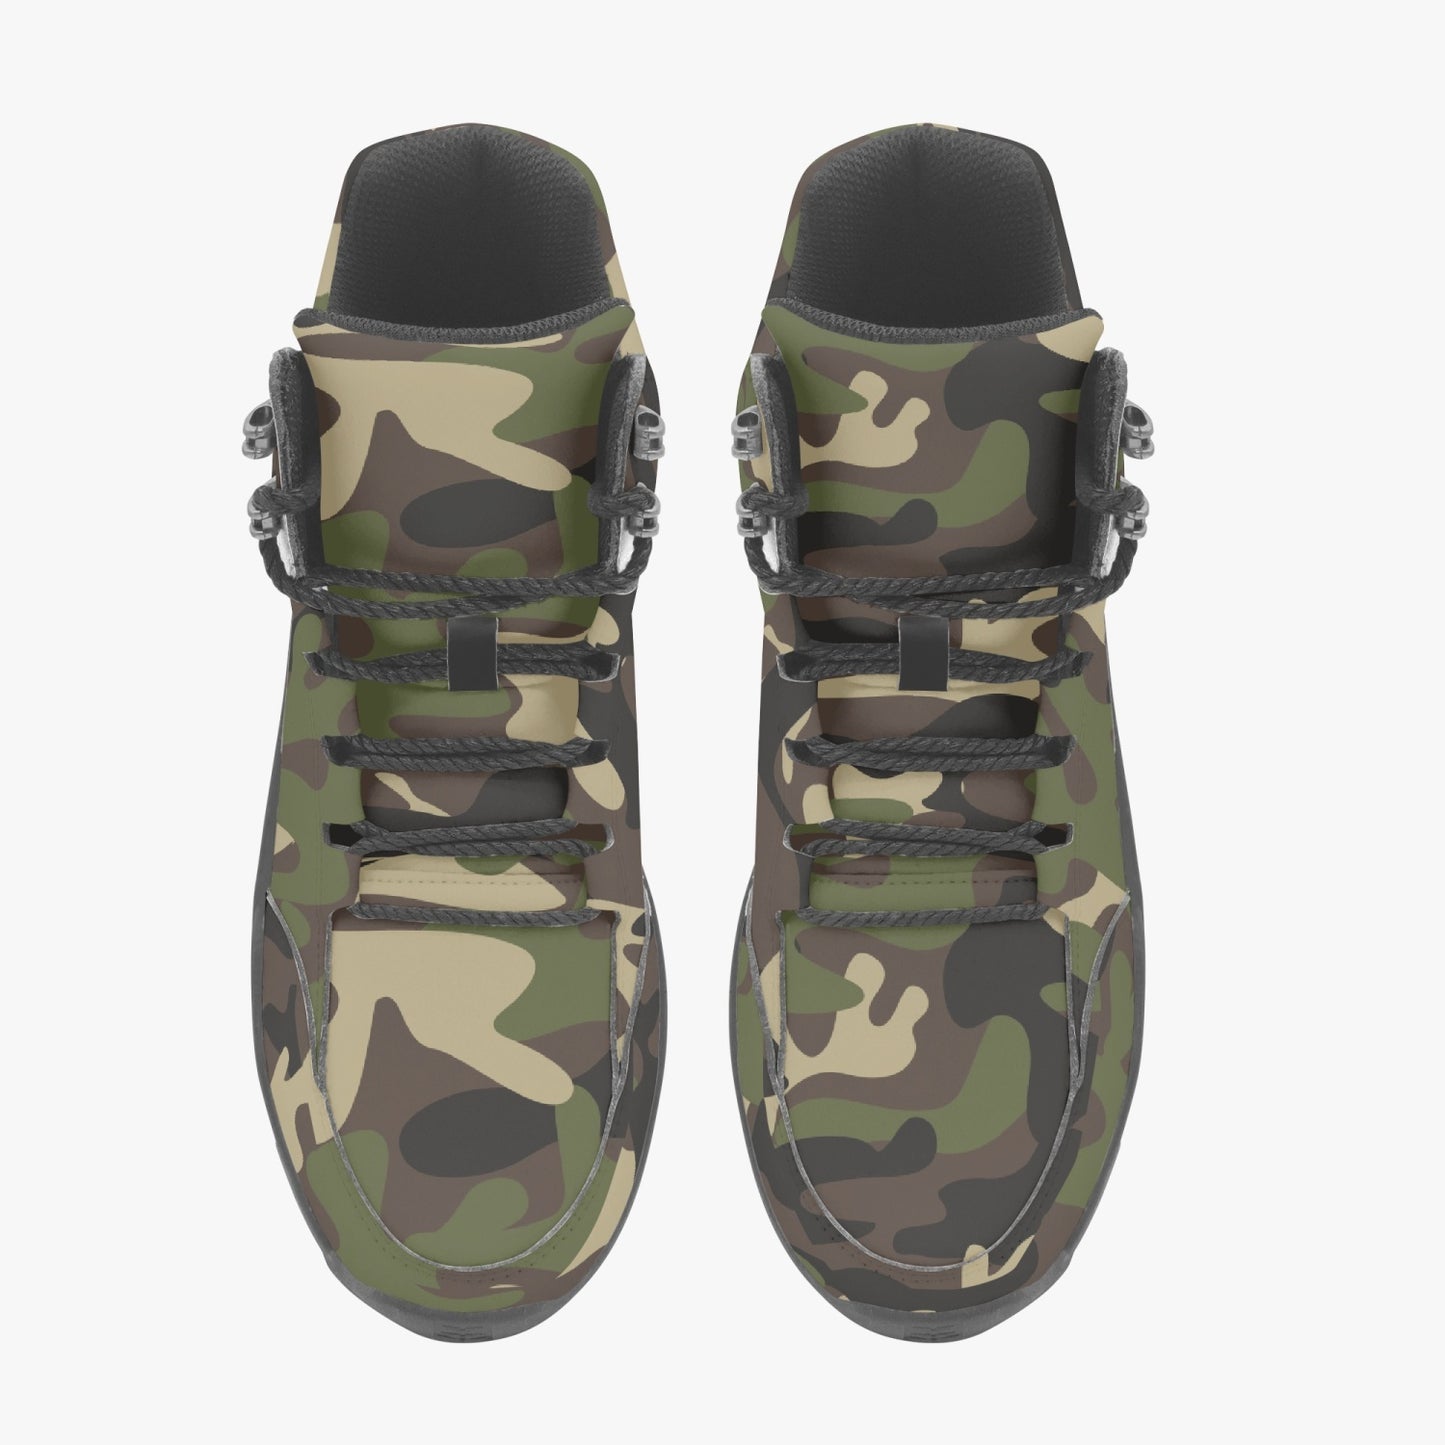 Camo Hiking Leather Boots, Green Army Camouflage Men Women Lace Up Walking Hunting Rubber Shoes Print Black Ankle Winter Casual Work Starcove Fashion